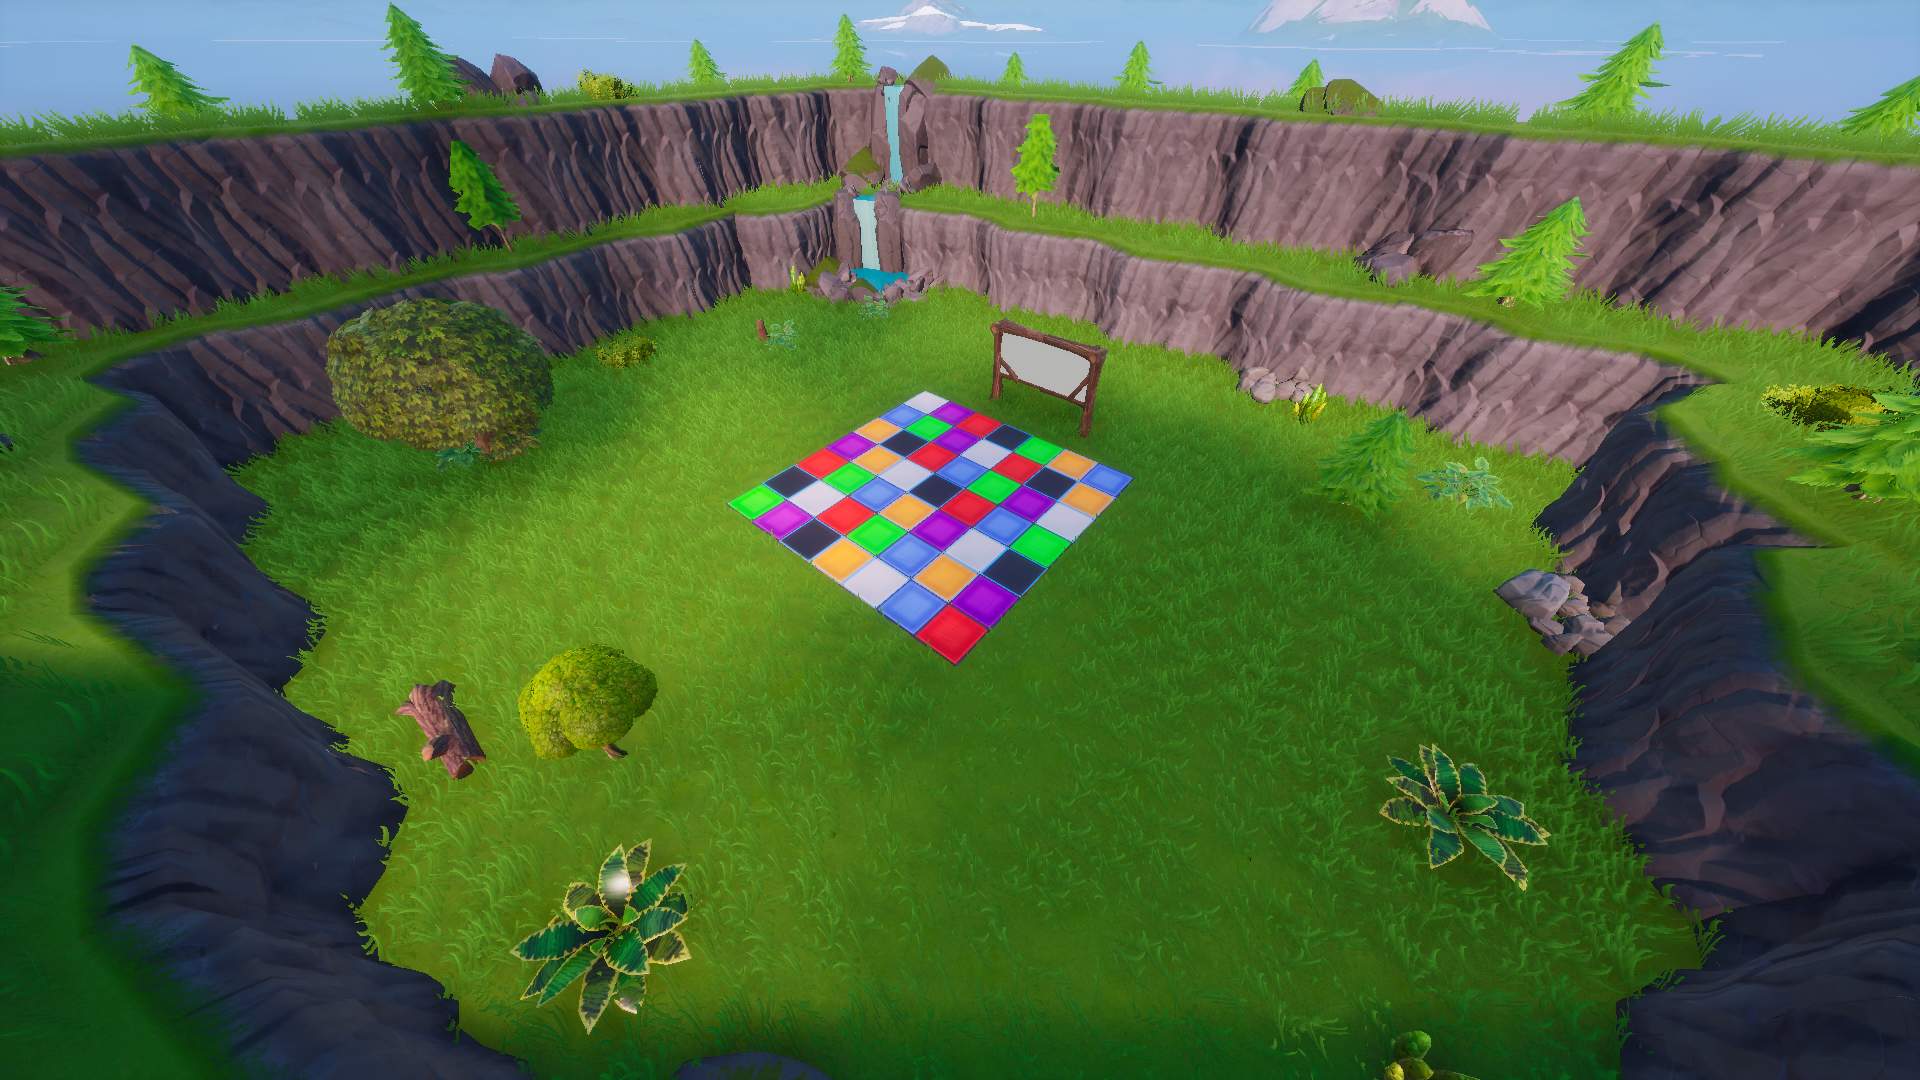 Touch Grass - Simulation 3104-1585-7096 by mophf - Fortnite Creative Map  Code 